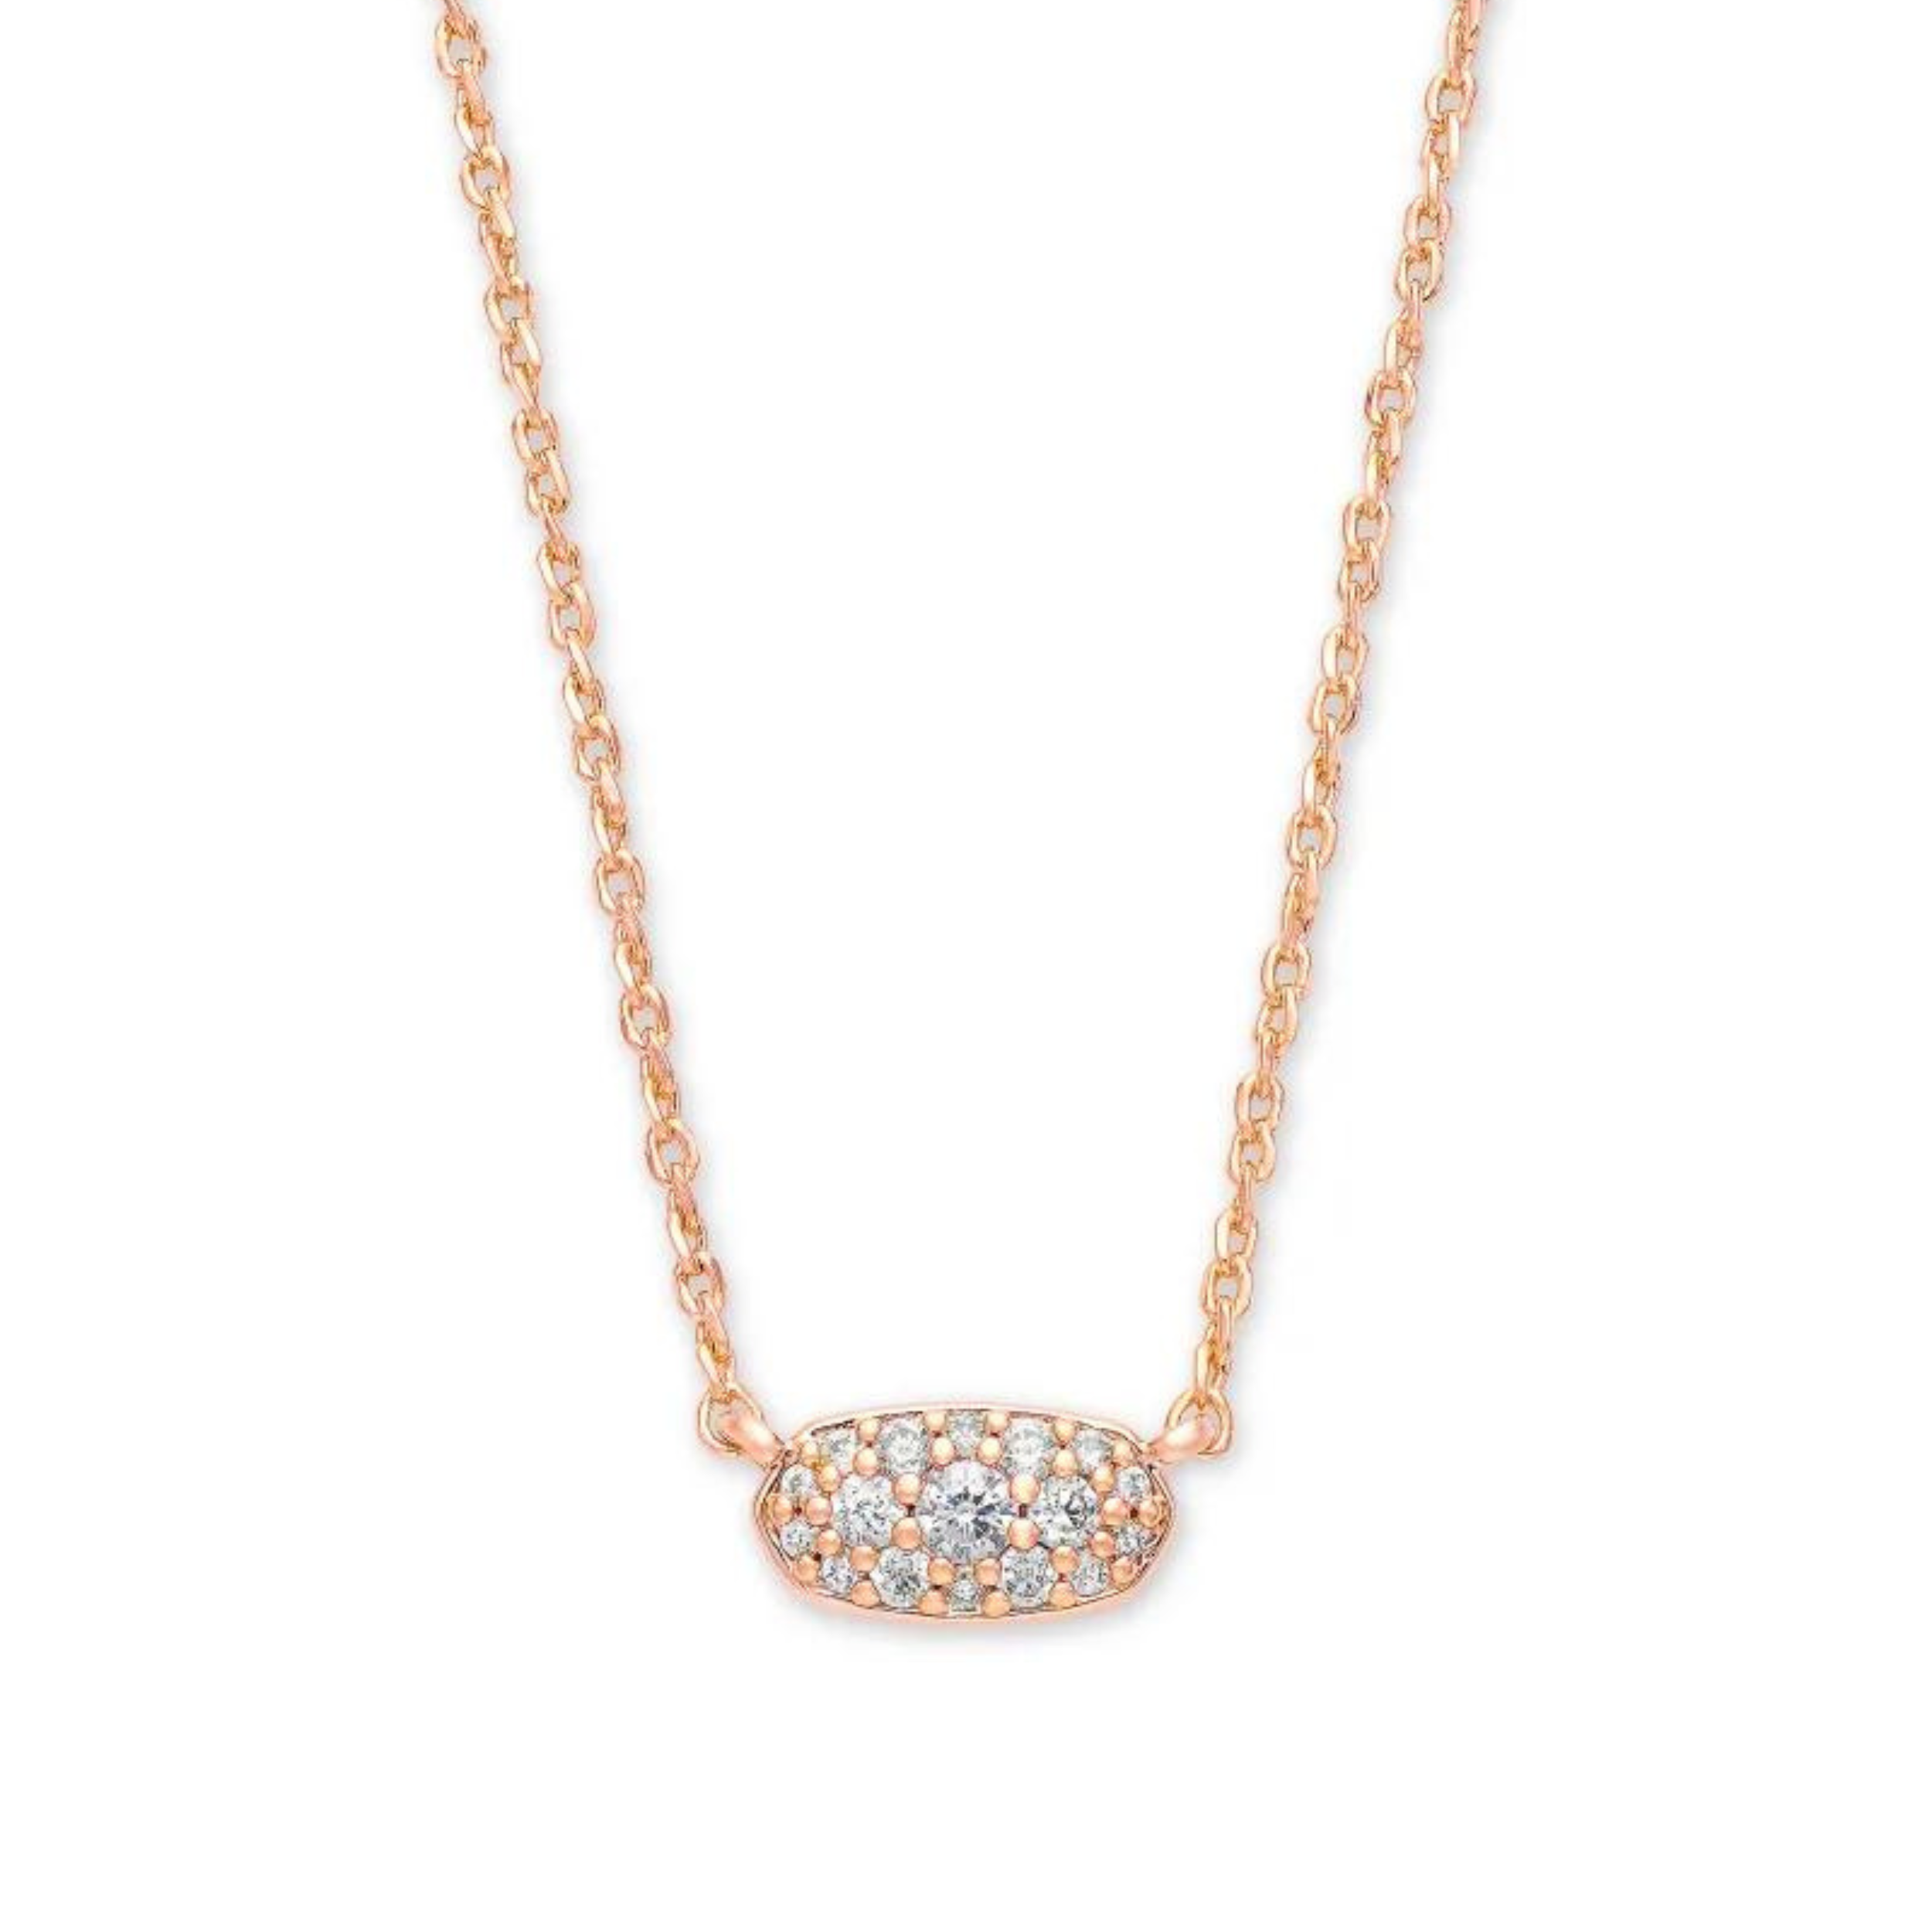 Rose gold necklace with white crystals, pictured on a white background.